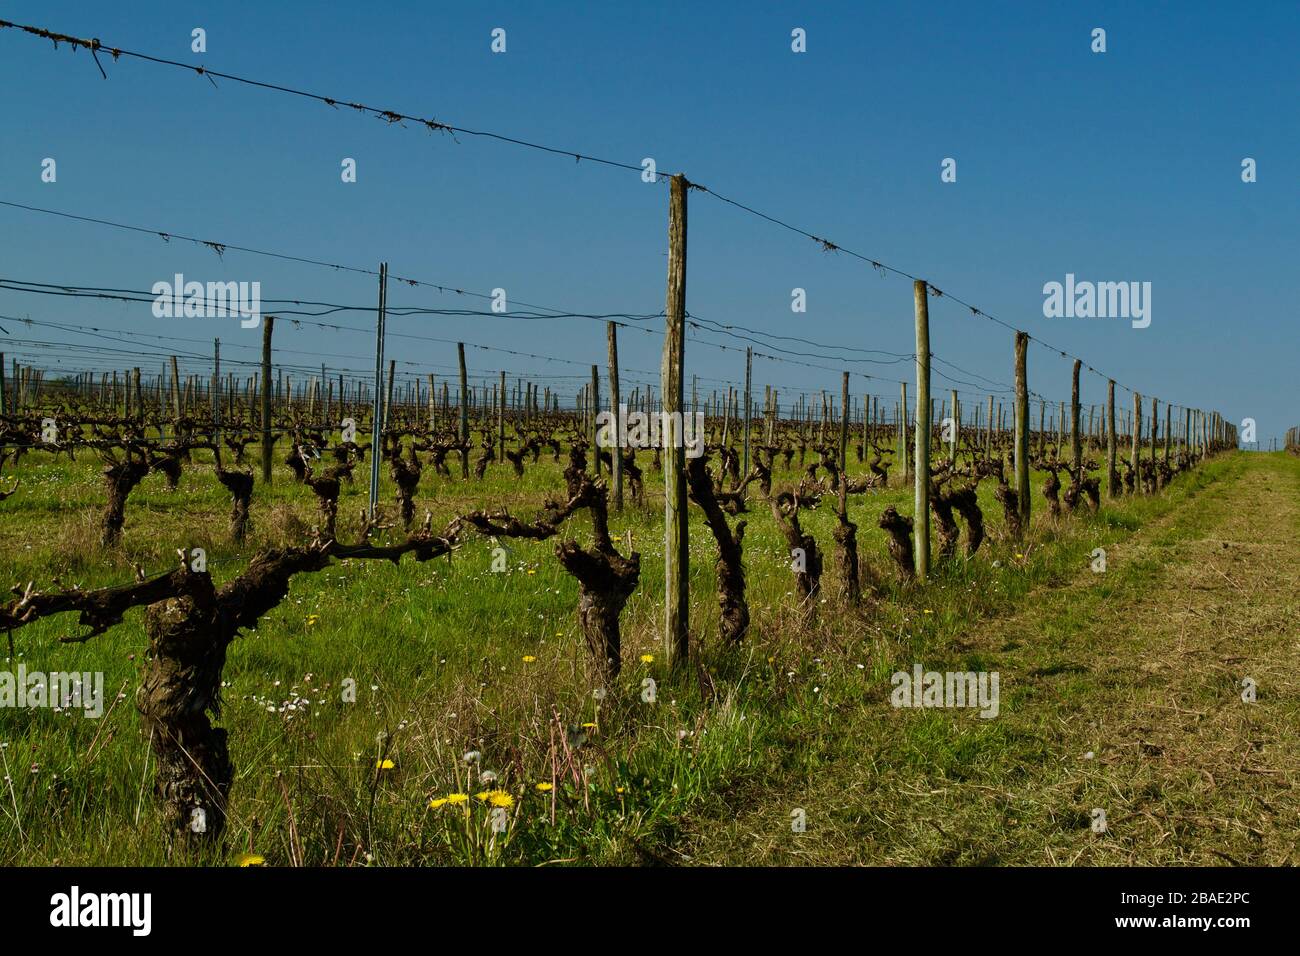 Rows of vines in a vinyard in the Cotes de Duras AOC of SW France. Stock Photo